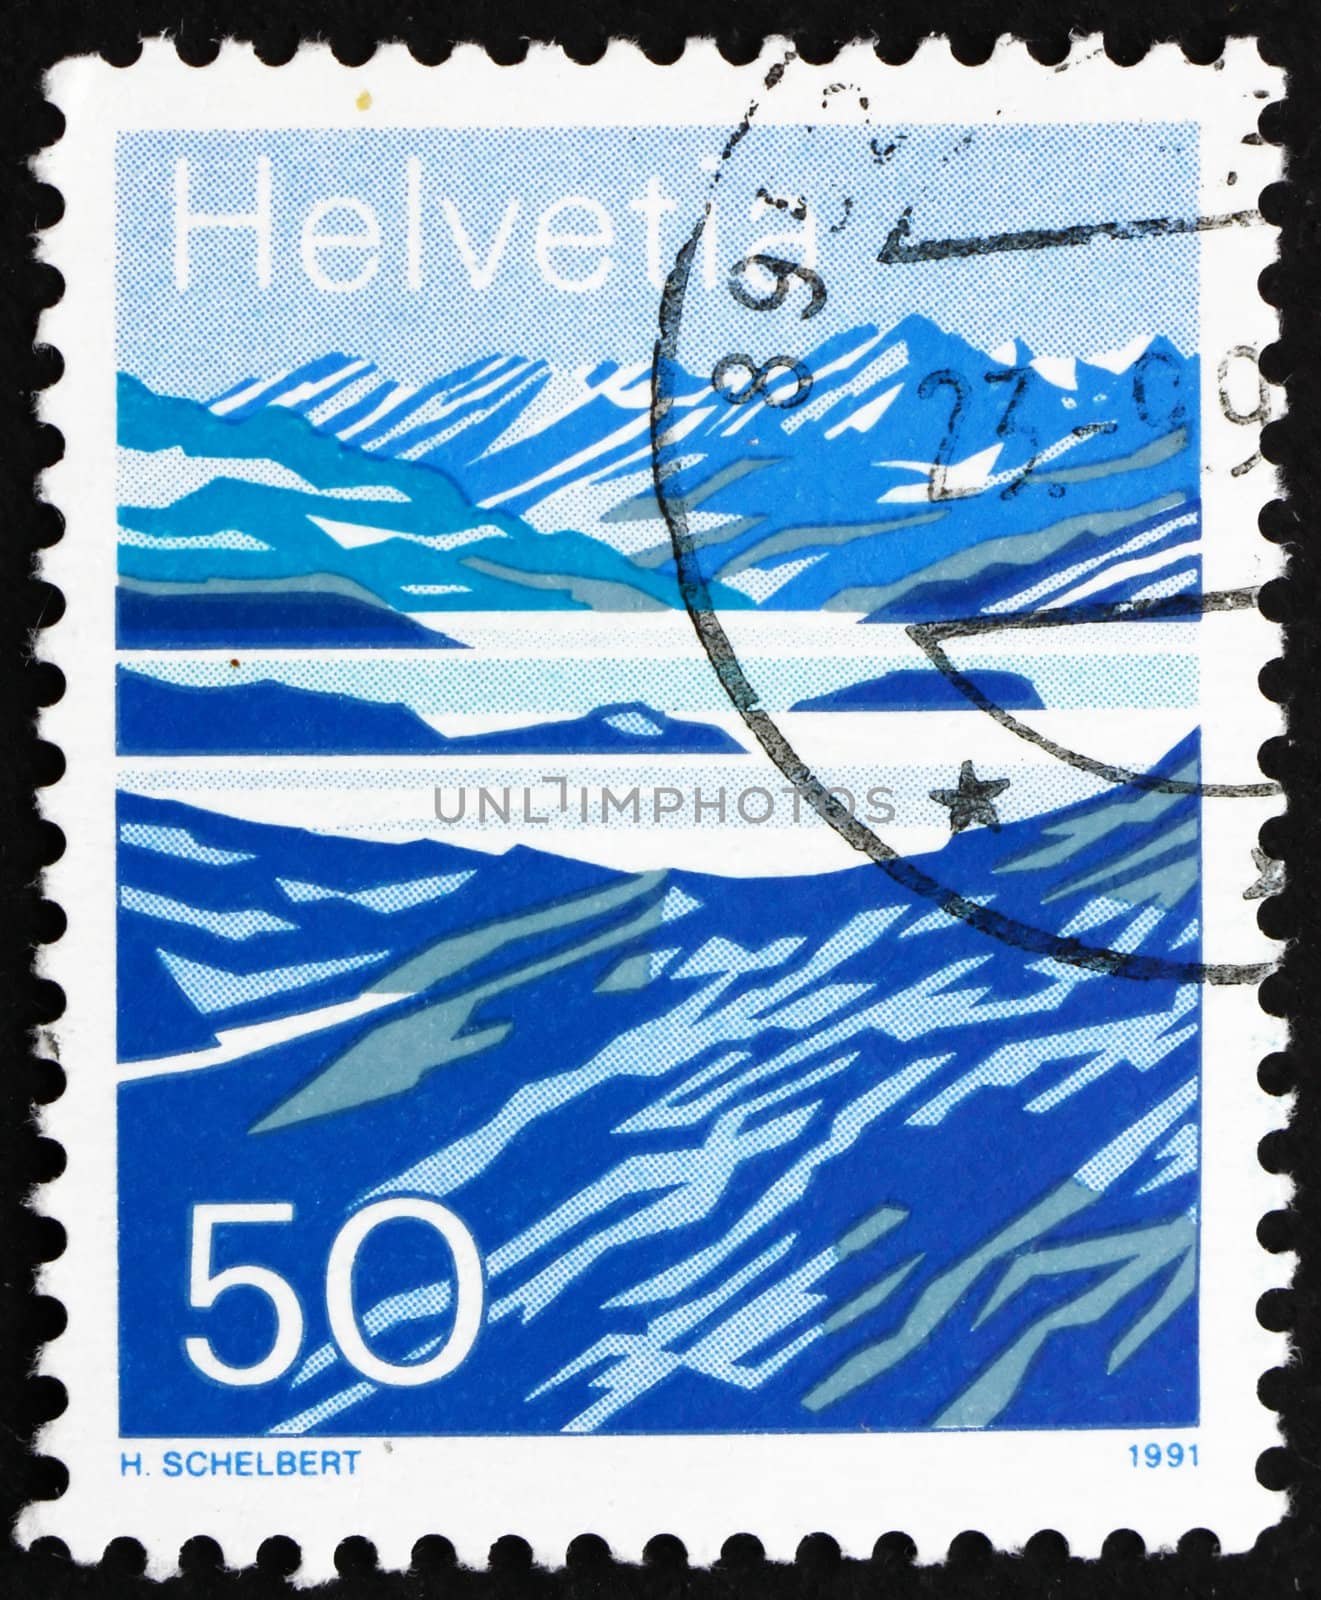 SWITZERLAND - CIRCA 1991: a stamp printed in the Switzerland shows Mountain Lakes, Switzerland, circa 1991